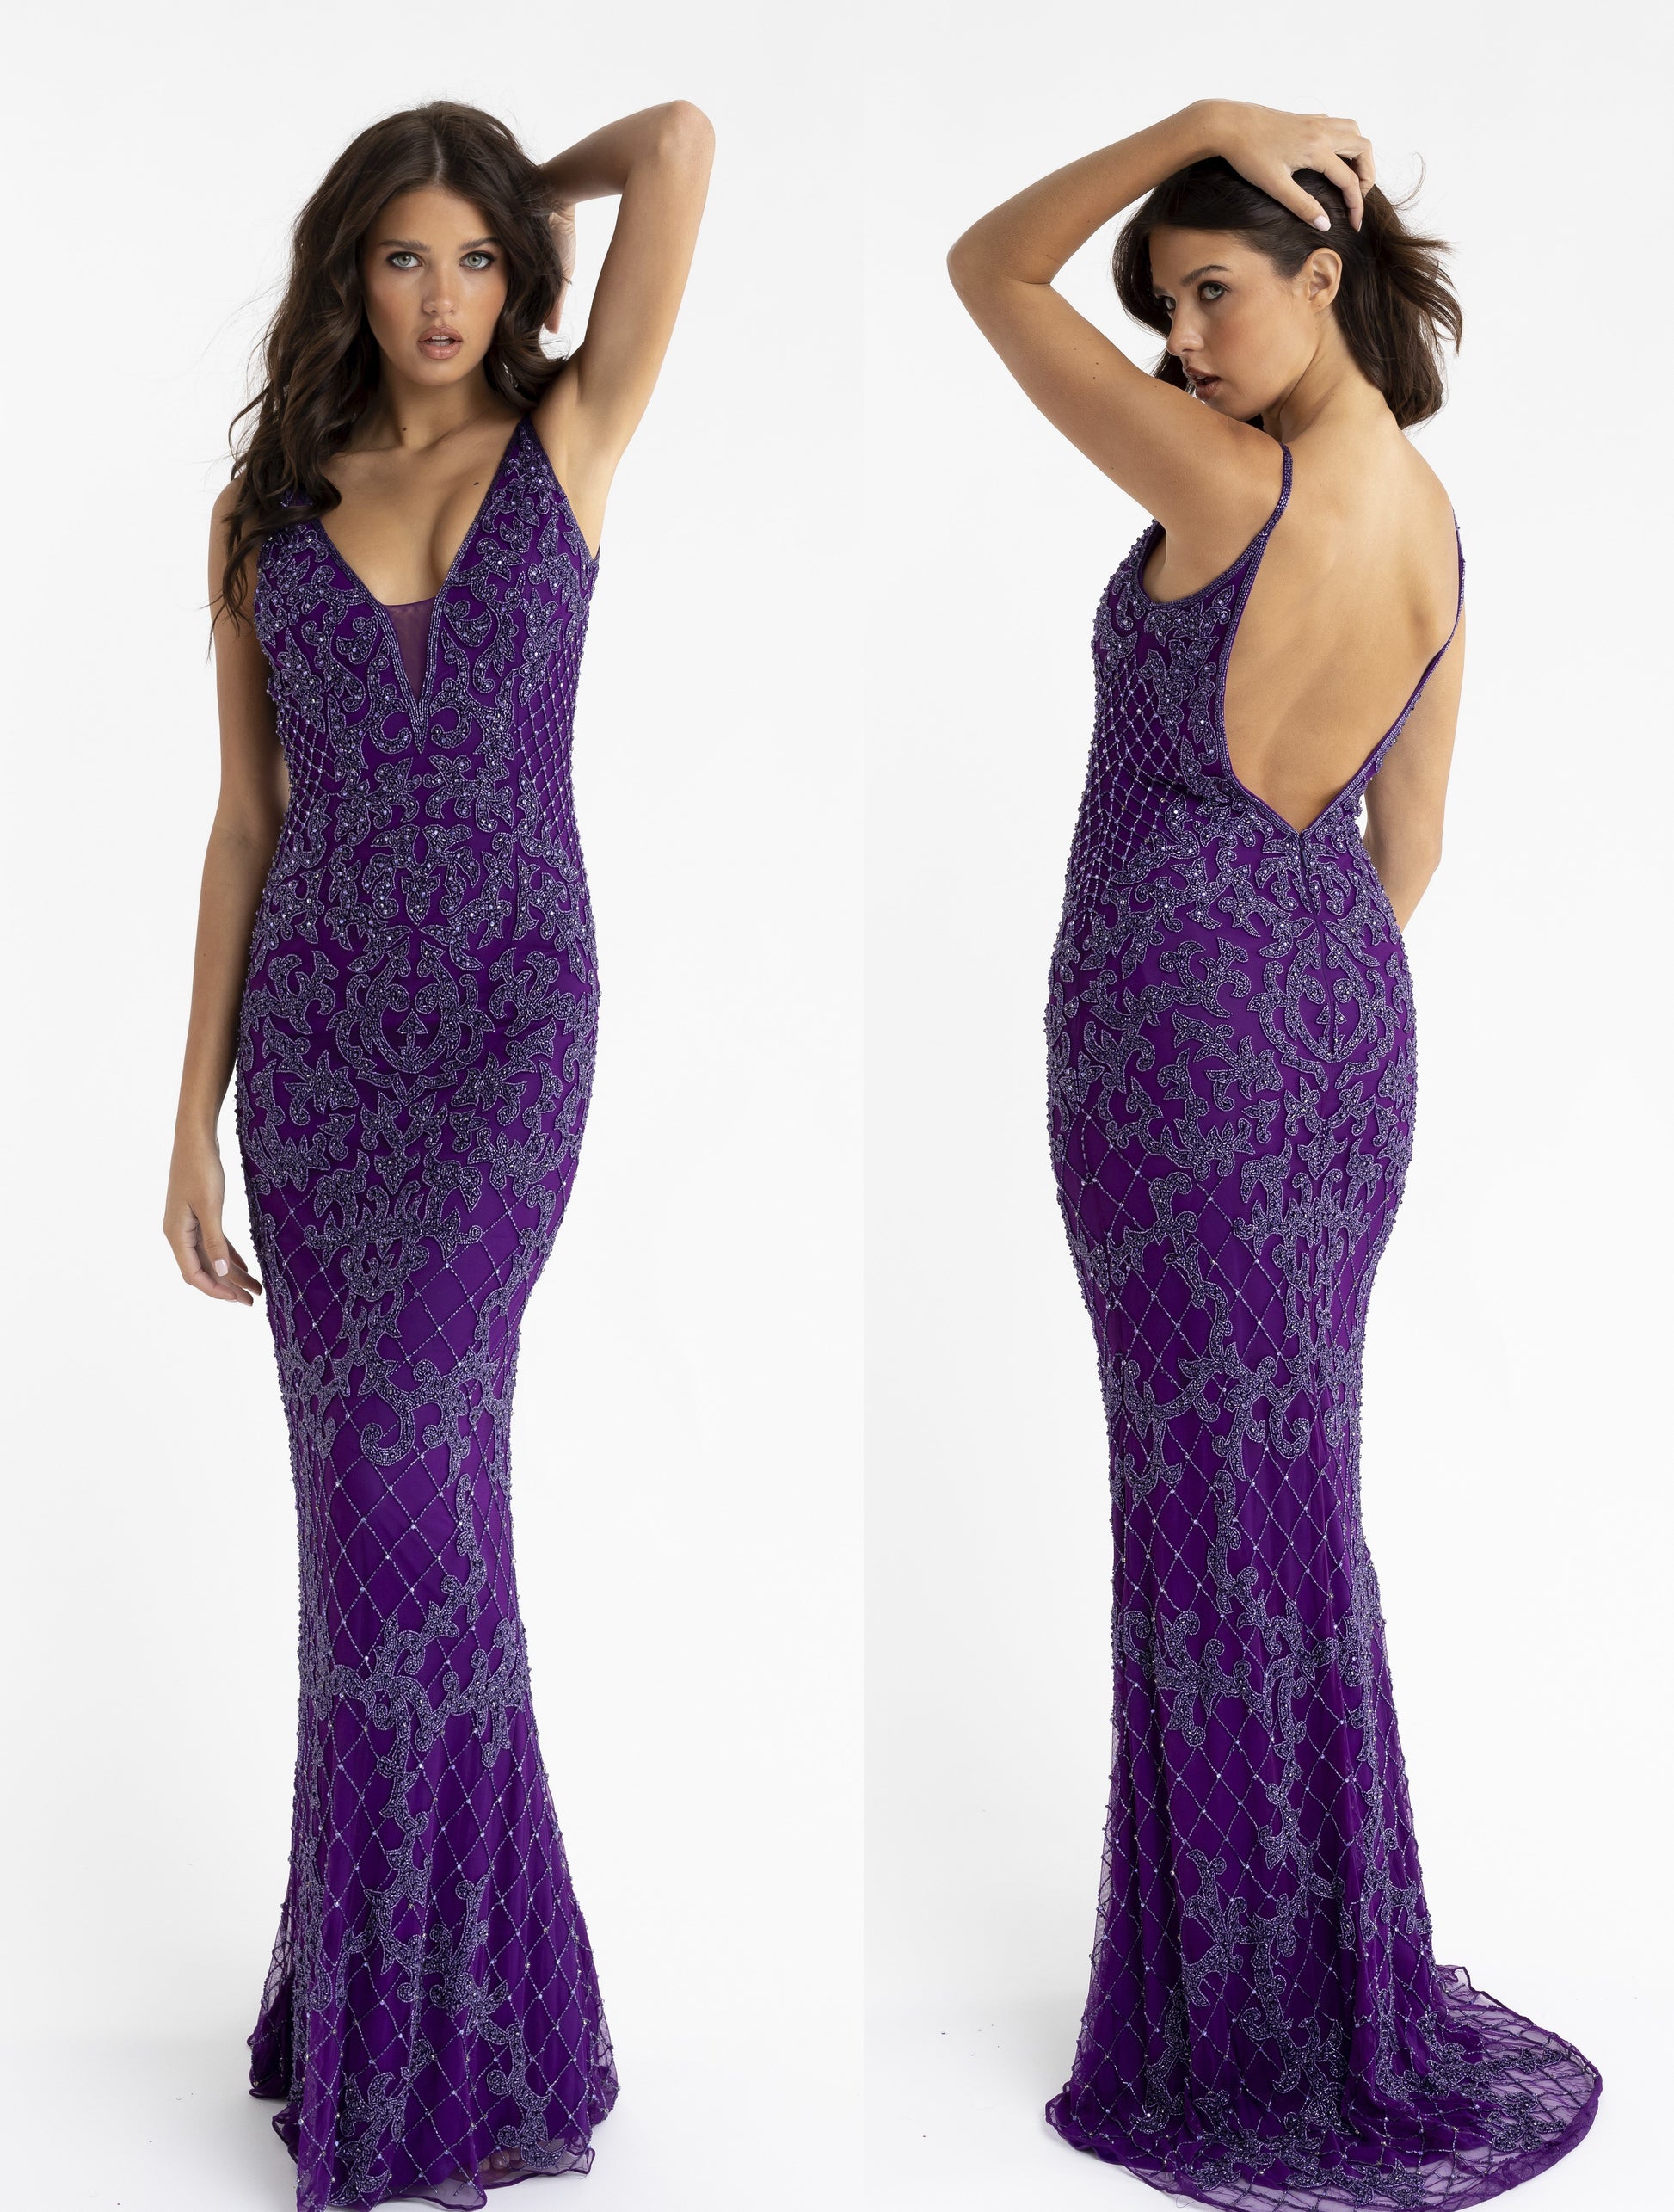 PRIMAVERA-COUTURE-3433-PURPLE-PROM-DRESS-FRONT-LONG-BEADED-V-NECKLINE-BACKLESS